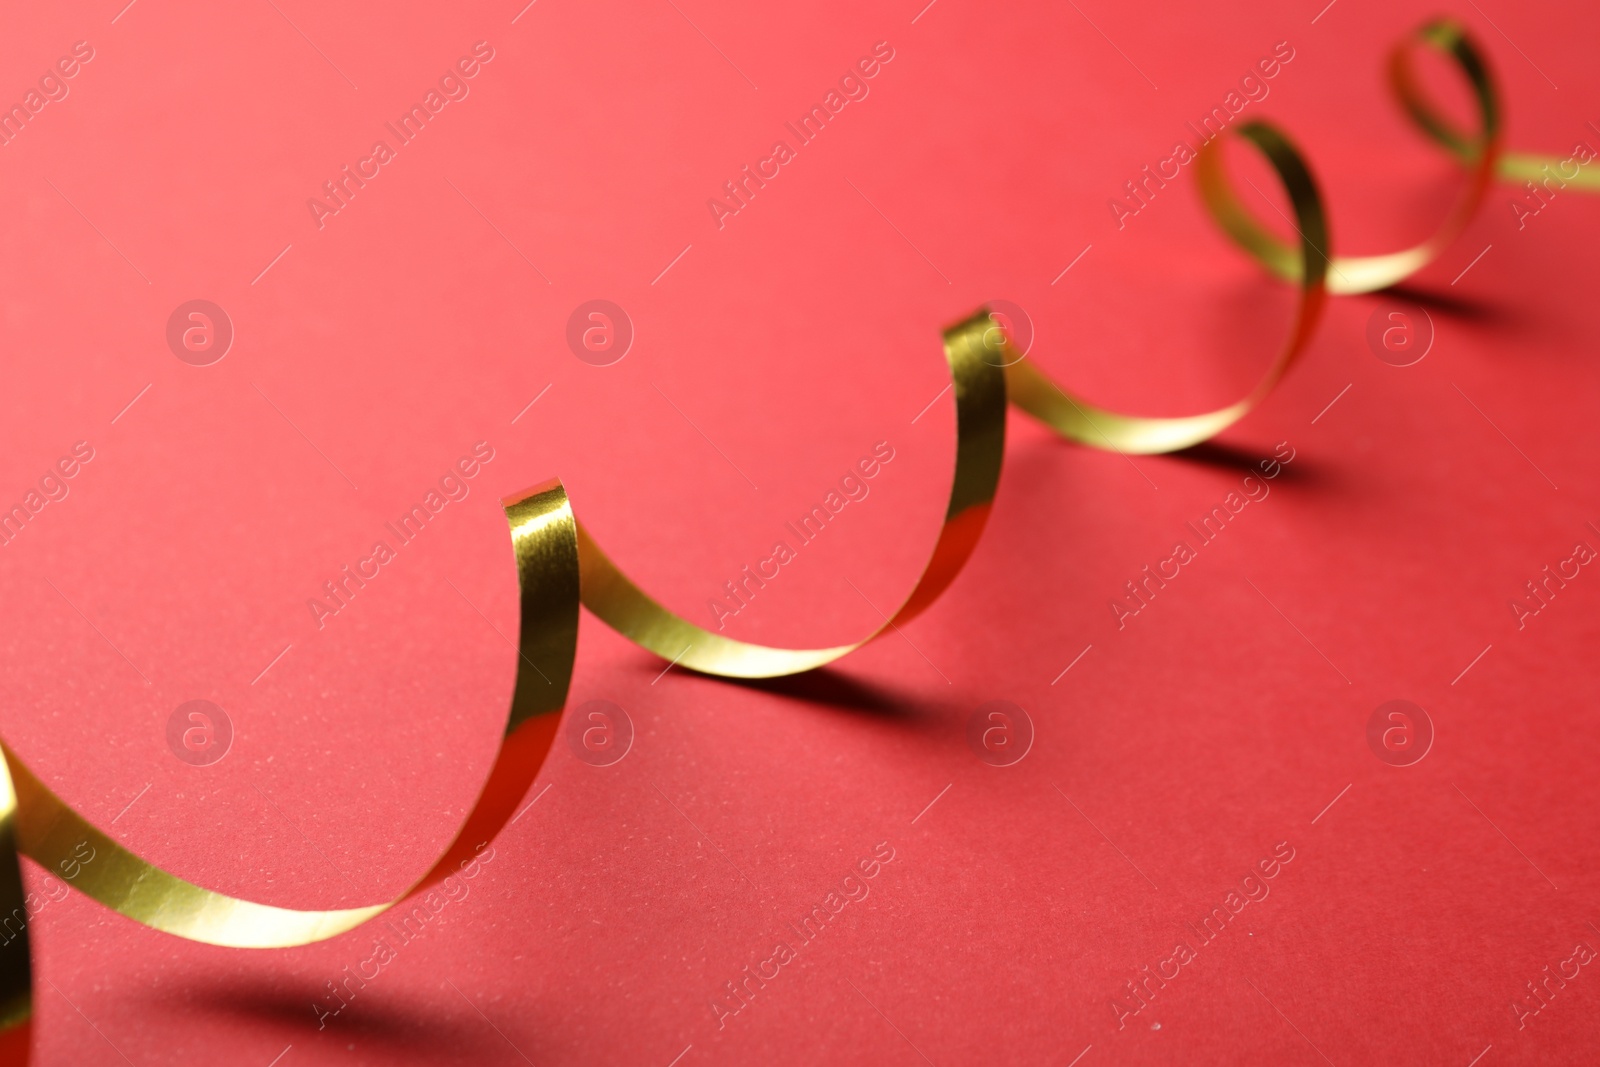 Photo of Shiny golden serpentine streamer on red background, closeup